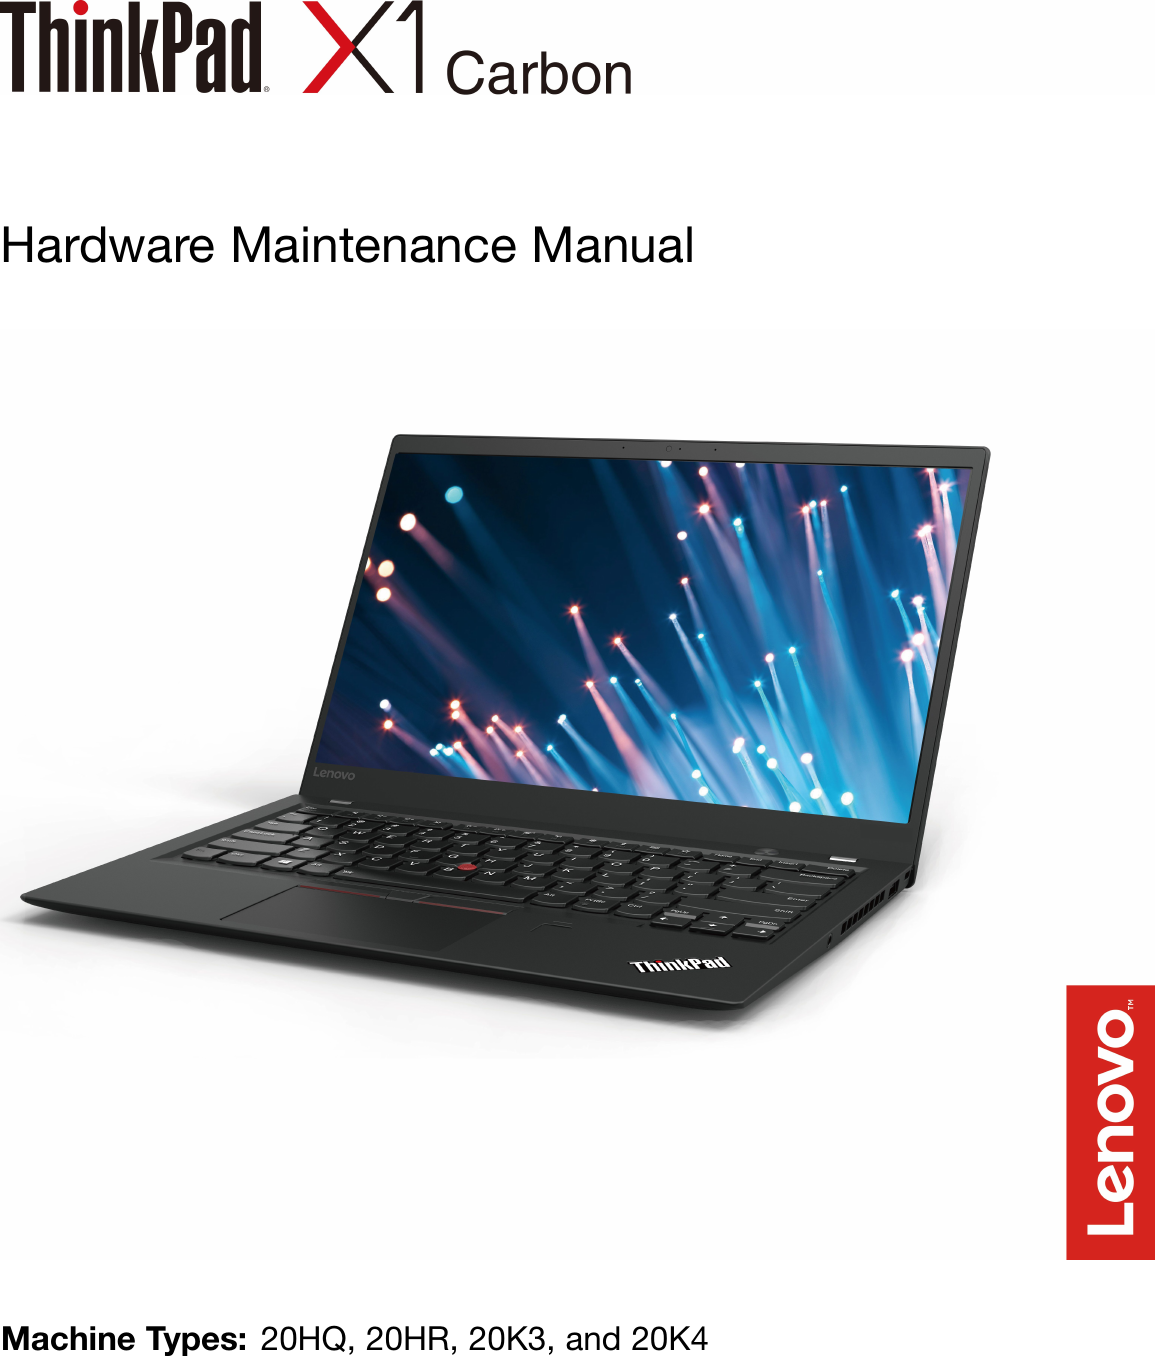 2200 machine type and serial number are invalid lenovo laptops